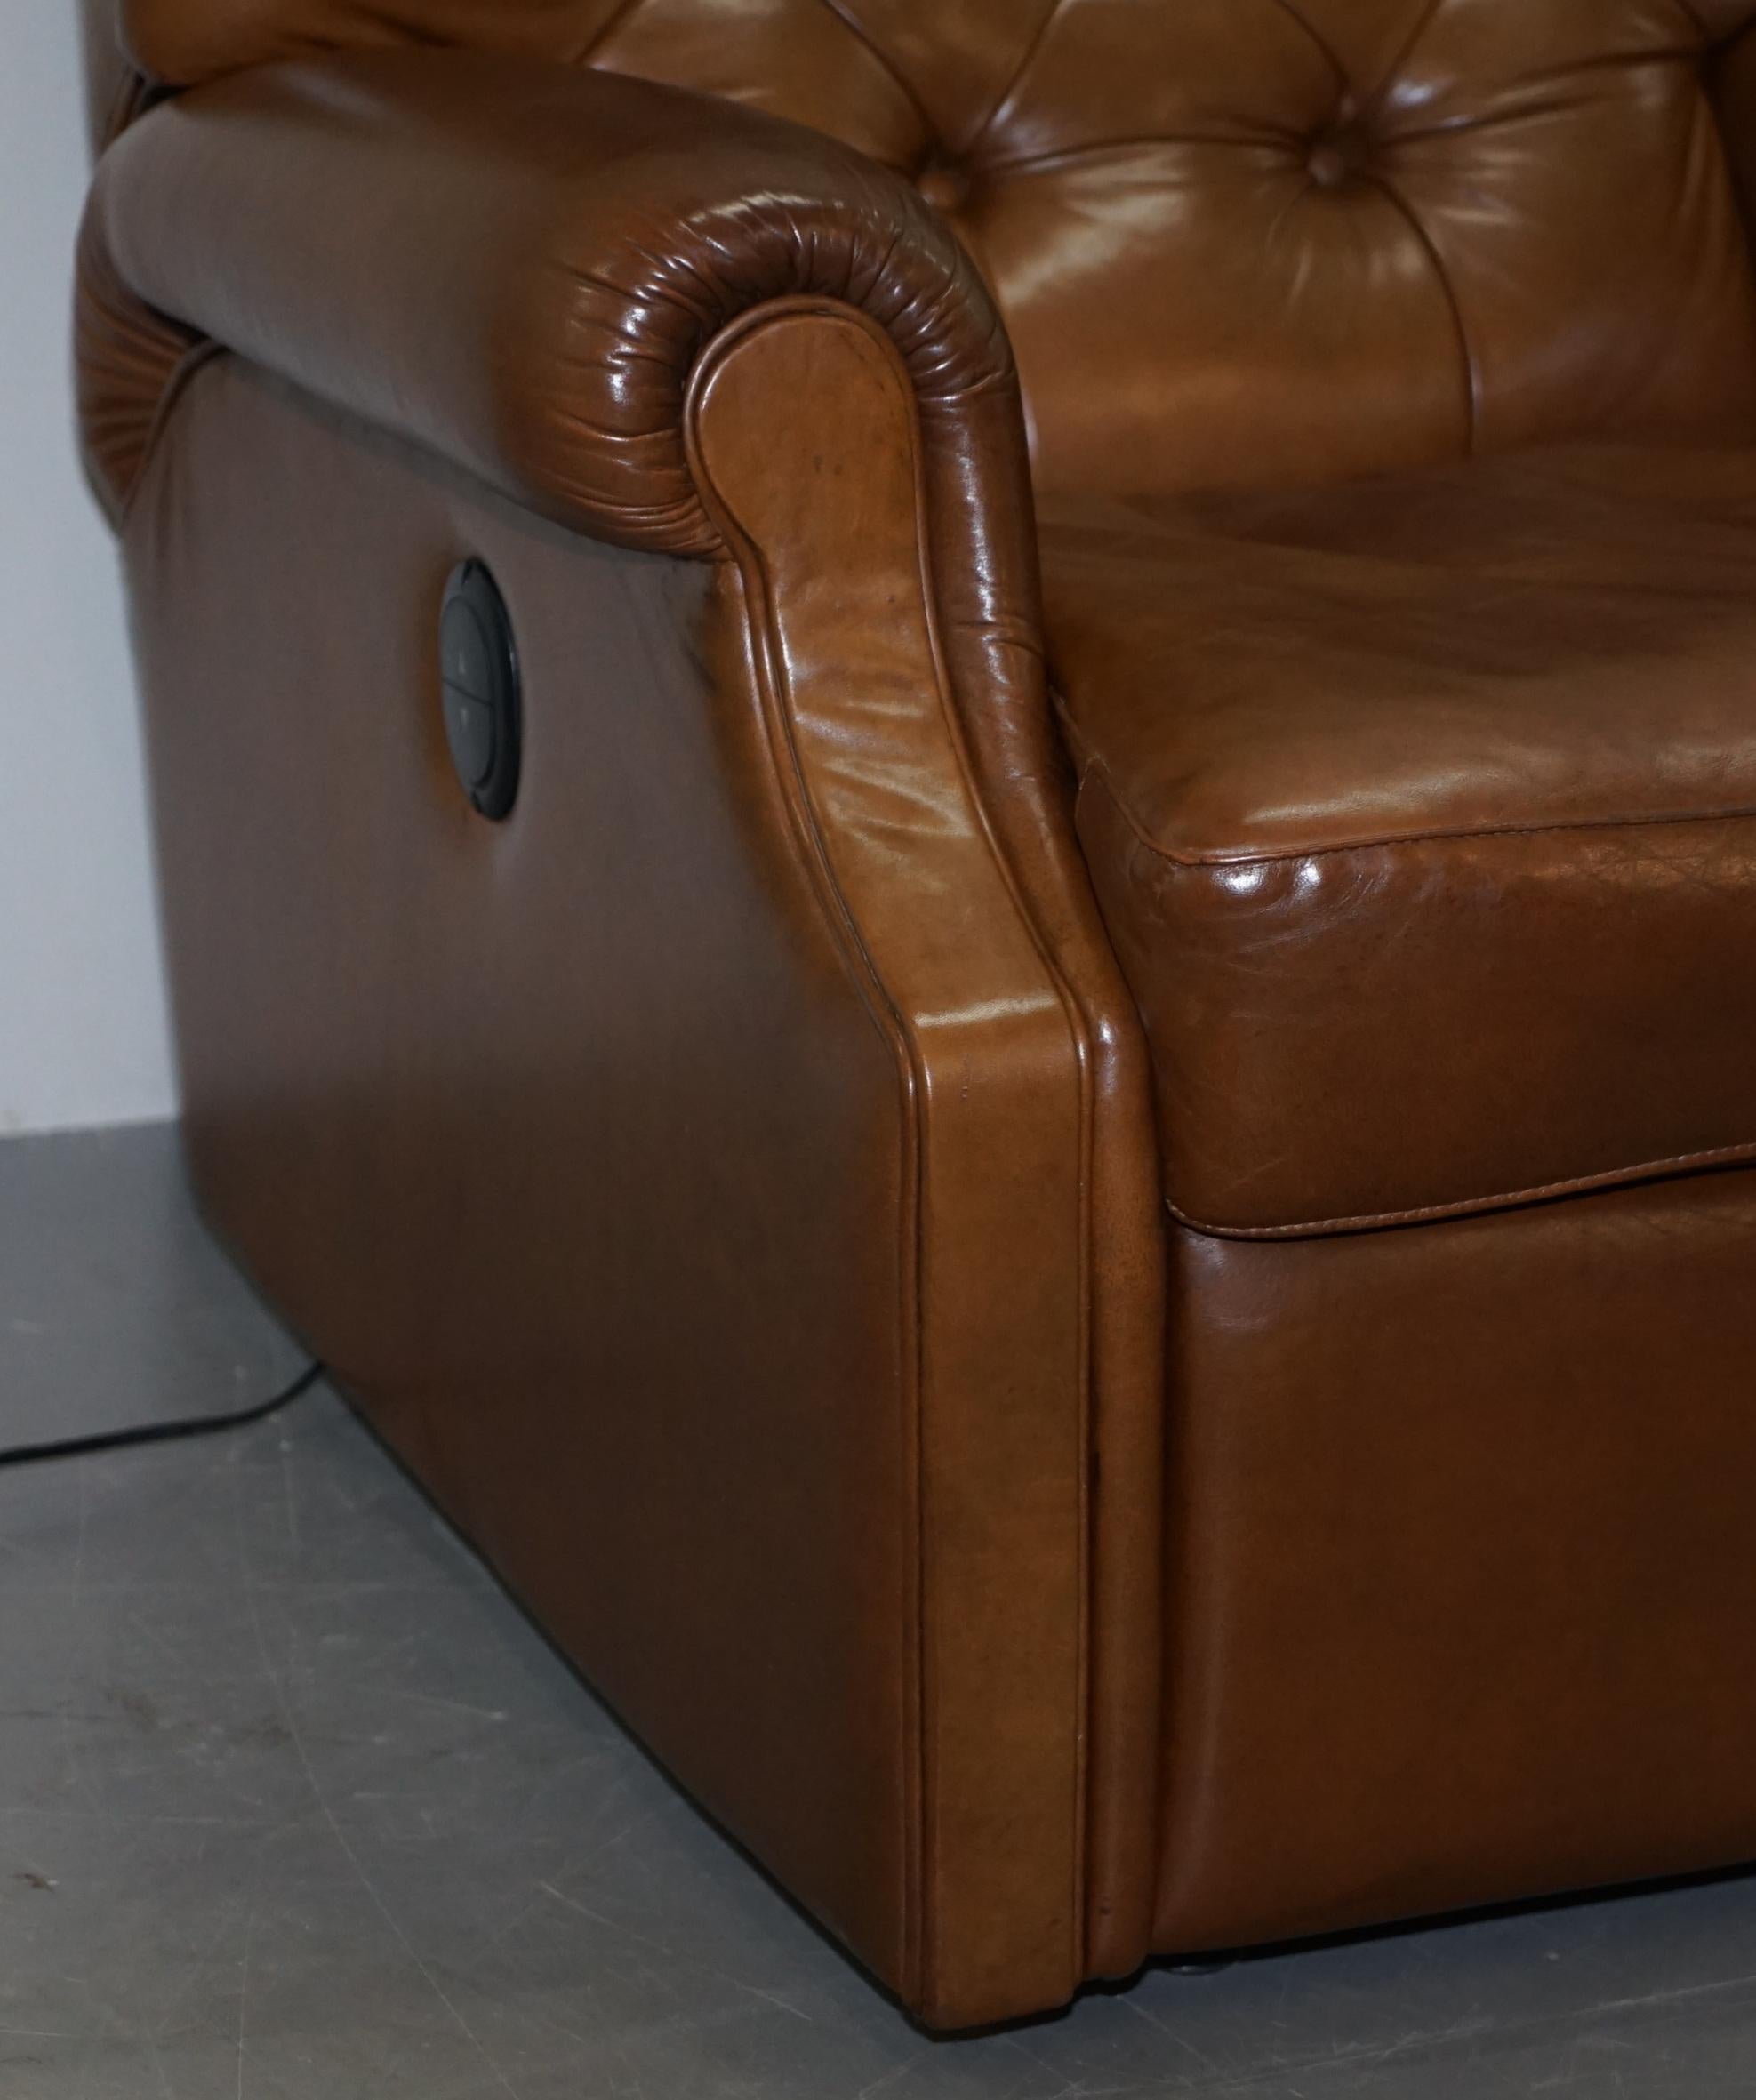 Lovely Tan Brown Leather Chesterfield Electric Relciner Armchair Comfortable!!!! 2